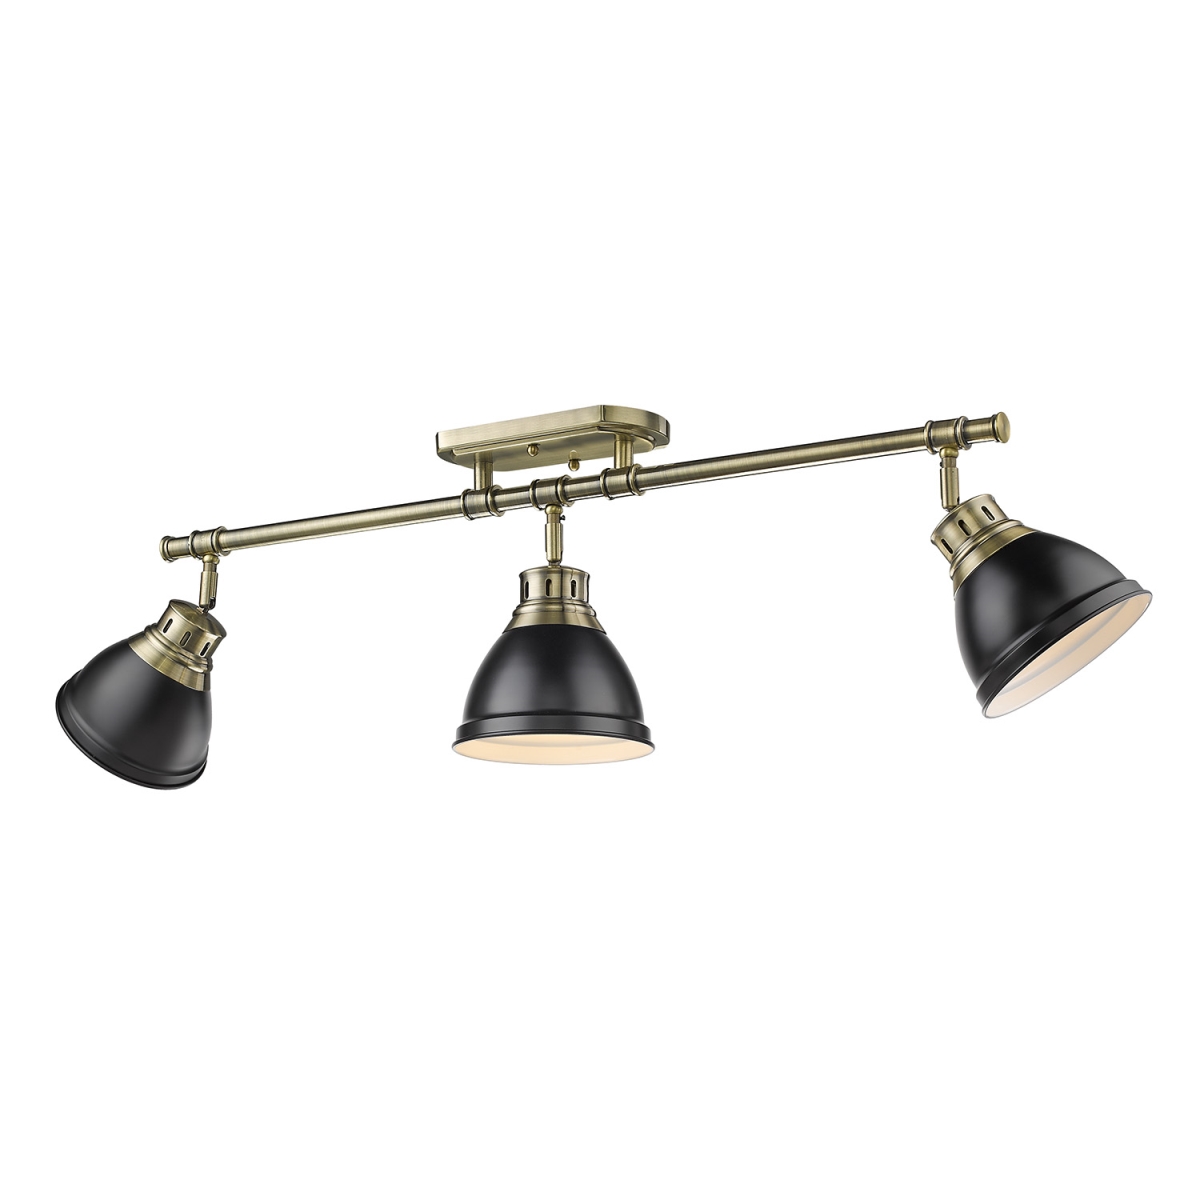 3602-3sf Ab-blk Duncan 3 Light Semi-flush Track With Matte Black Shades, Aged Brass